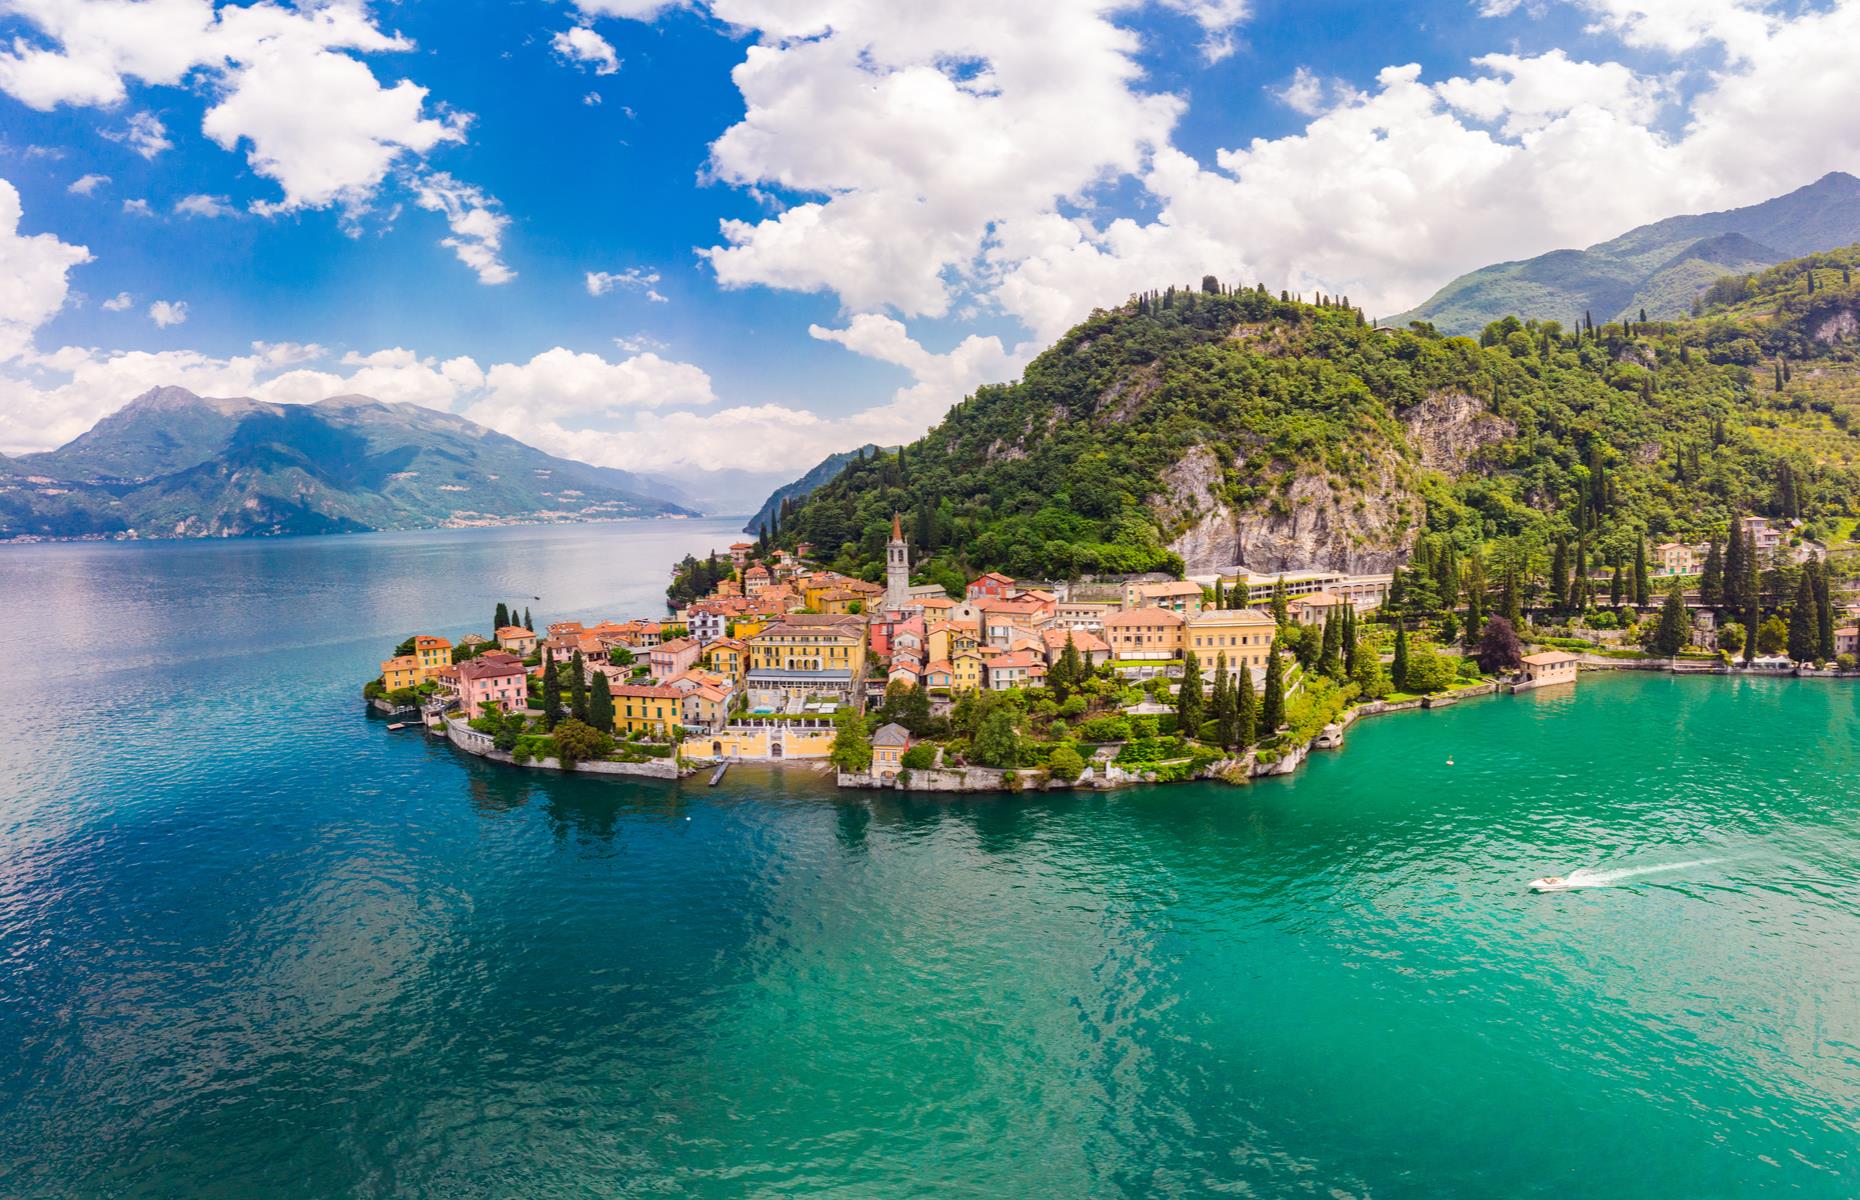 <p>Boat is the most practical and pleasurable way to get around the 20-mile-long (32km) lake, so hire a motorboat or <a href="https://taxiboatvarenna.com/lake-como-visit-villa-balbianello-boat-tour/">taxi boat</a> to speed, 007 style, between mansions and pretty lakeside towns such as Bellagio and Varenna (pictured), which clings to a rocky headland opposite. There are plenty of swanky lakeside spots to stop for martinis and seafood lunches, and to explore cobbled lanes for hidden-away trysts and old-school trattorias. Another of Como's historic lakeside mansions is the exquisite <a href="https://www.villacarlotta.it/">Villa Carlotta </a>with its lush gardens. Keep the thrills going like Bond by catching a train to Venice, whose canals, palazzo and piazzas also dazzled in <em>Casino Royale </em>(and a good few other Bond movies).</p>